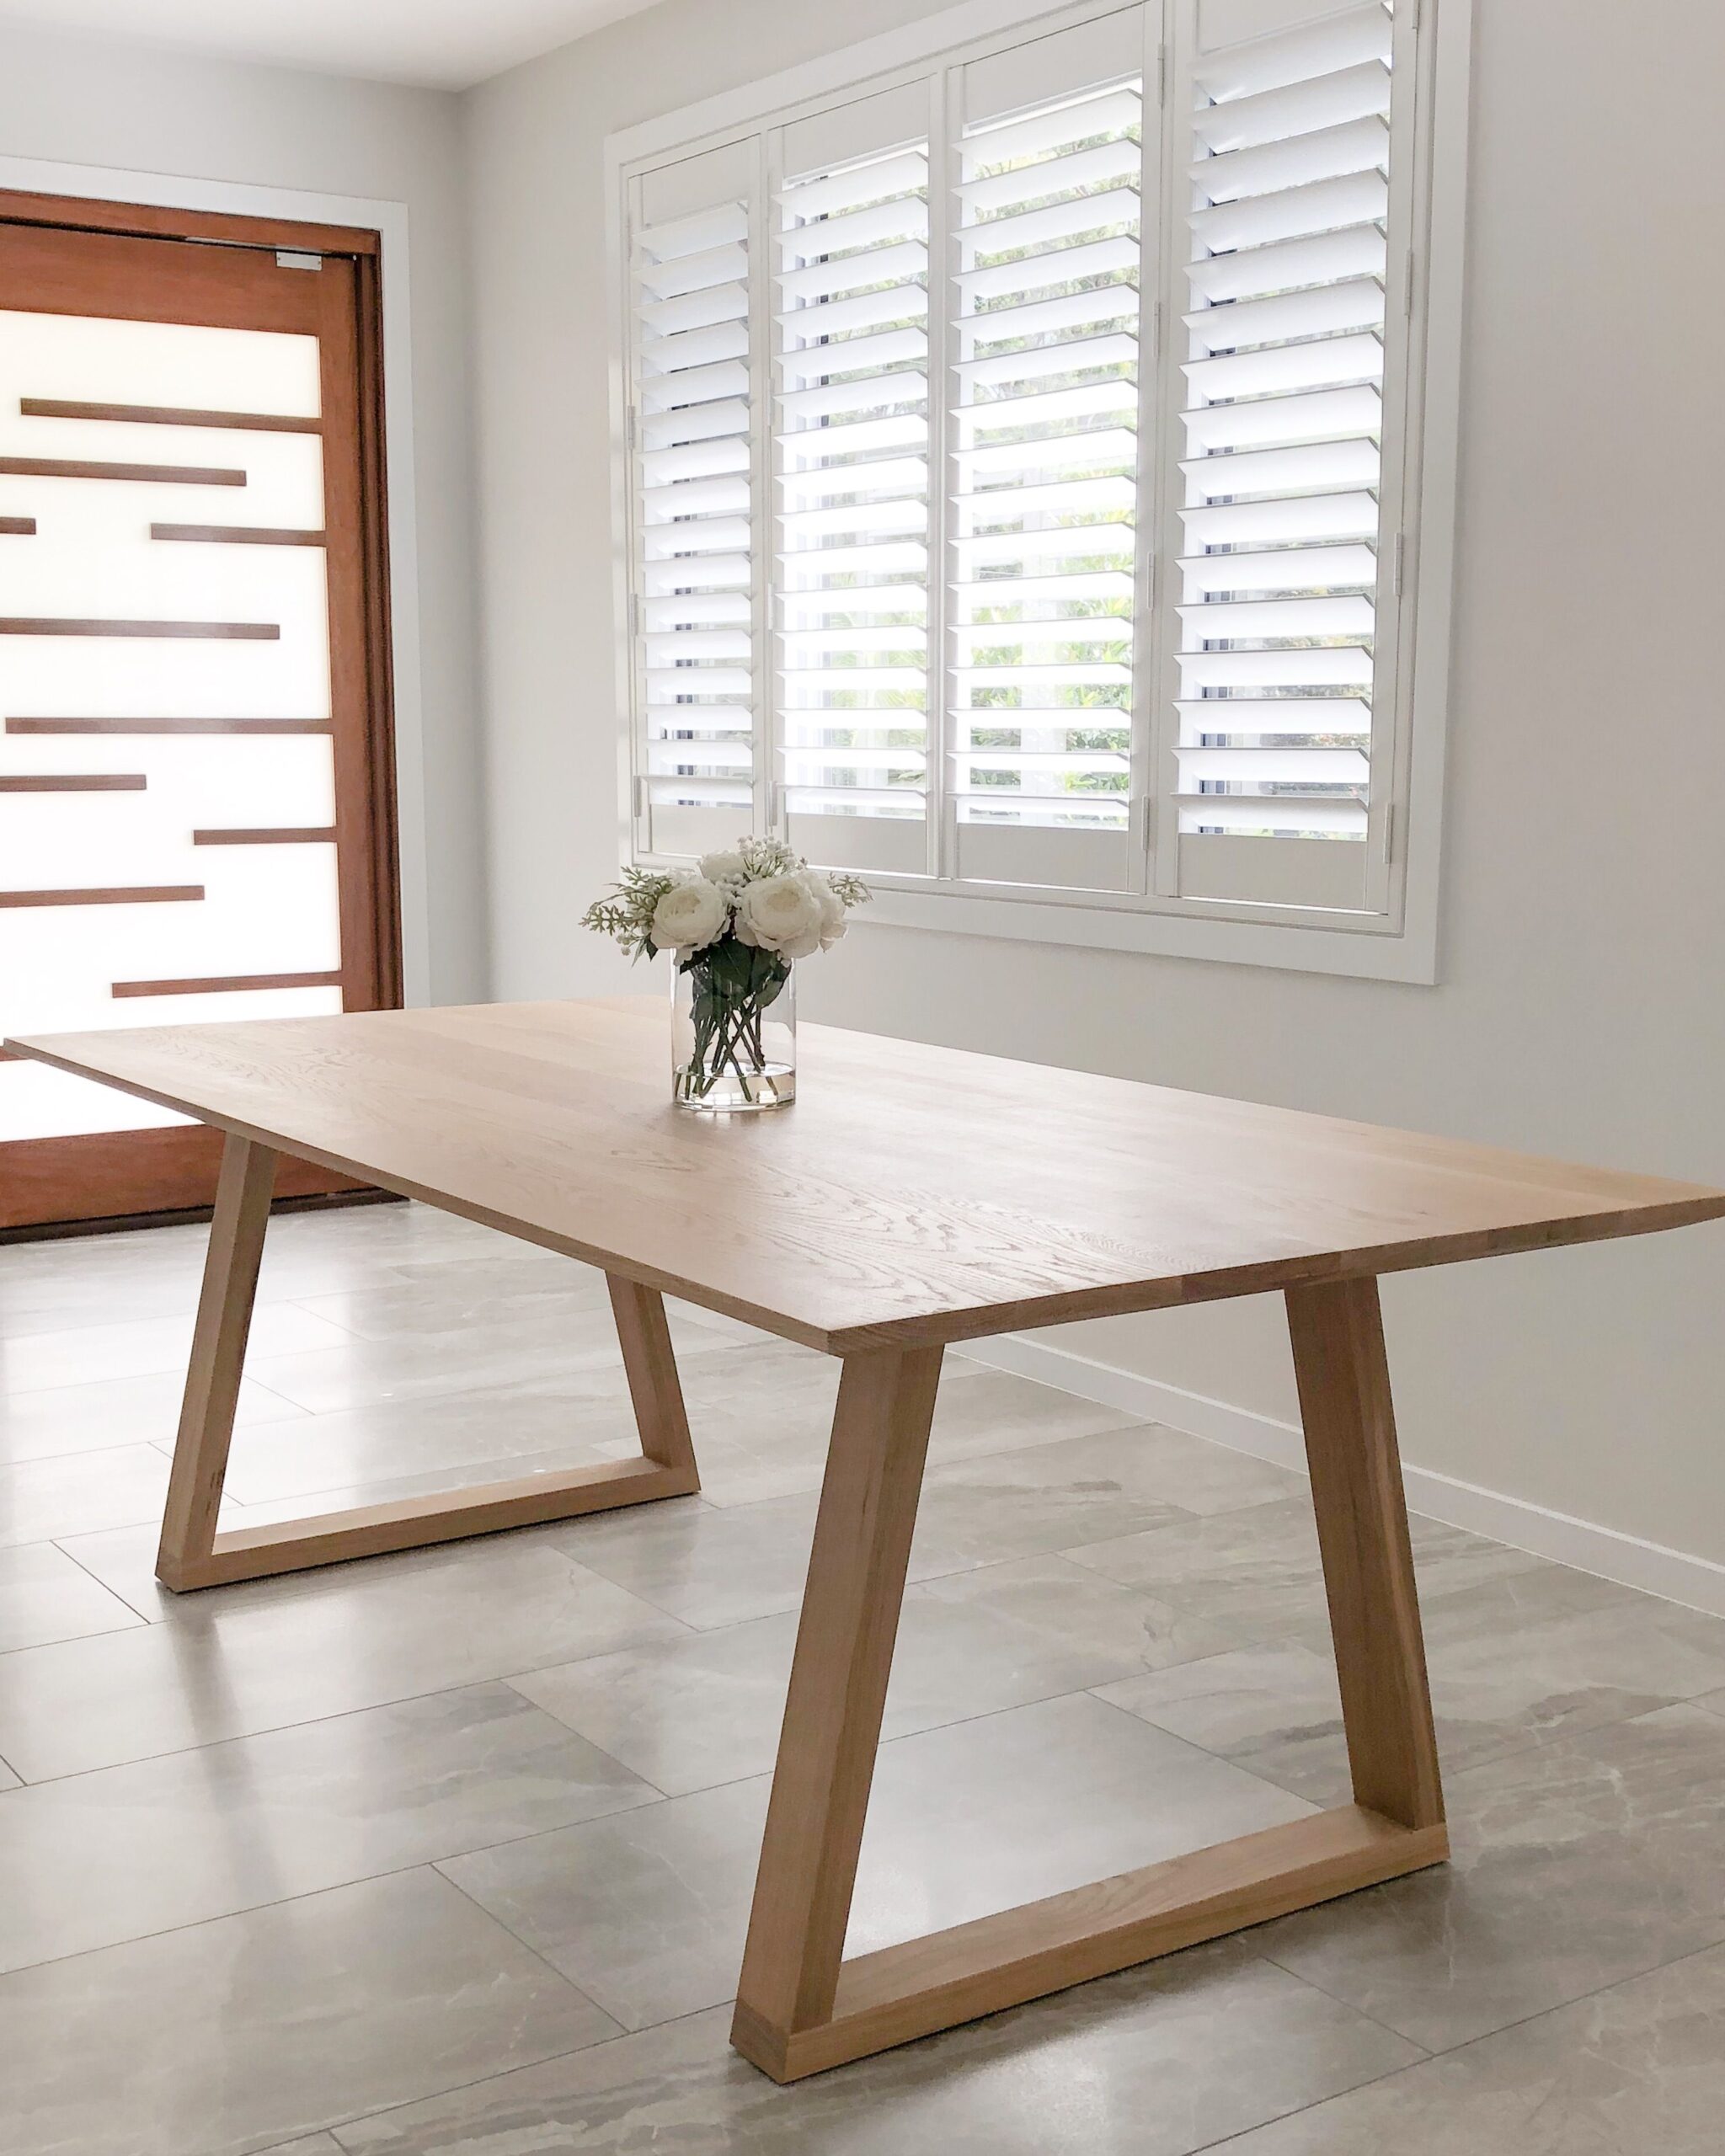 How to get the oak dining sets?